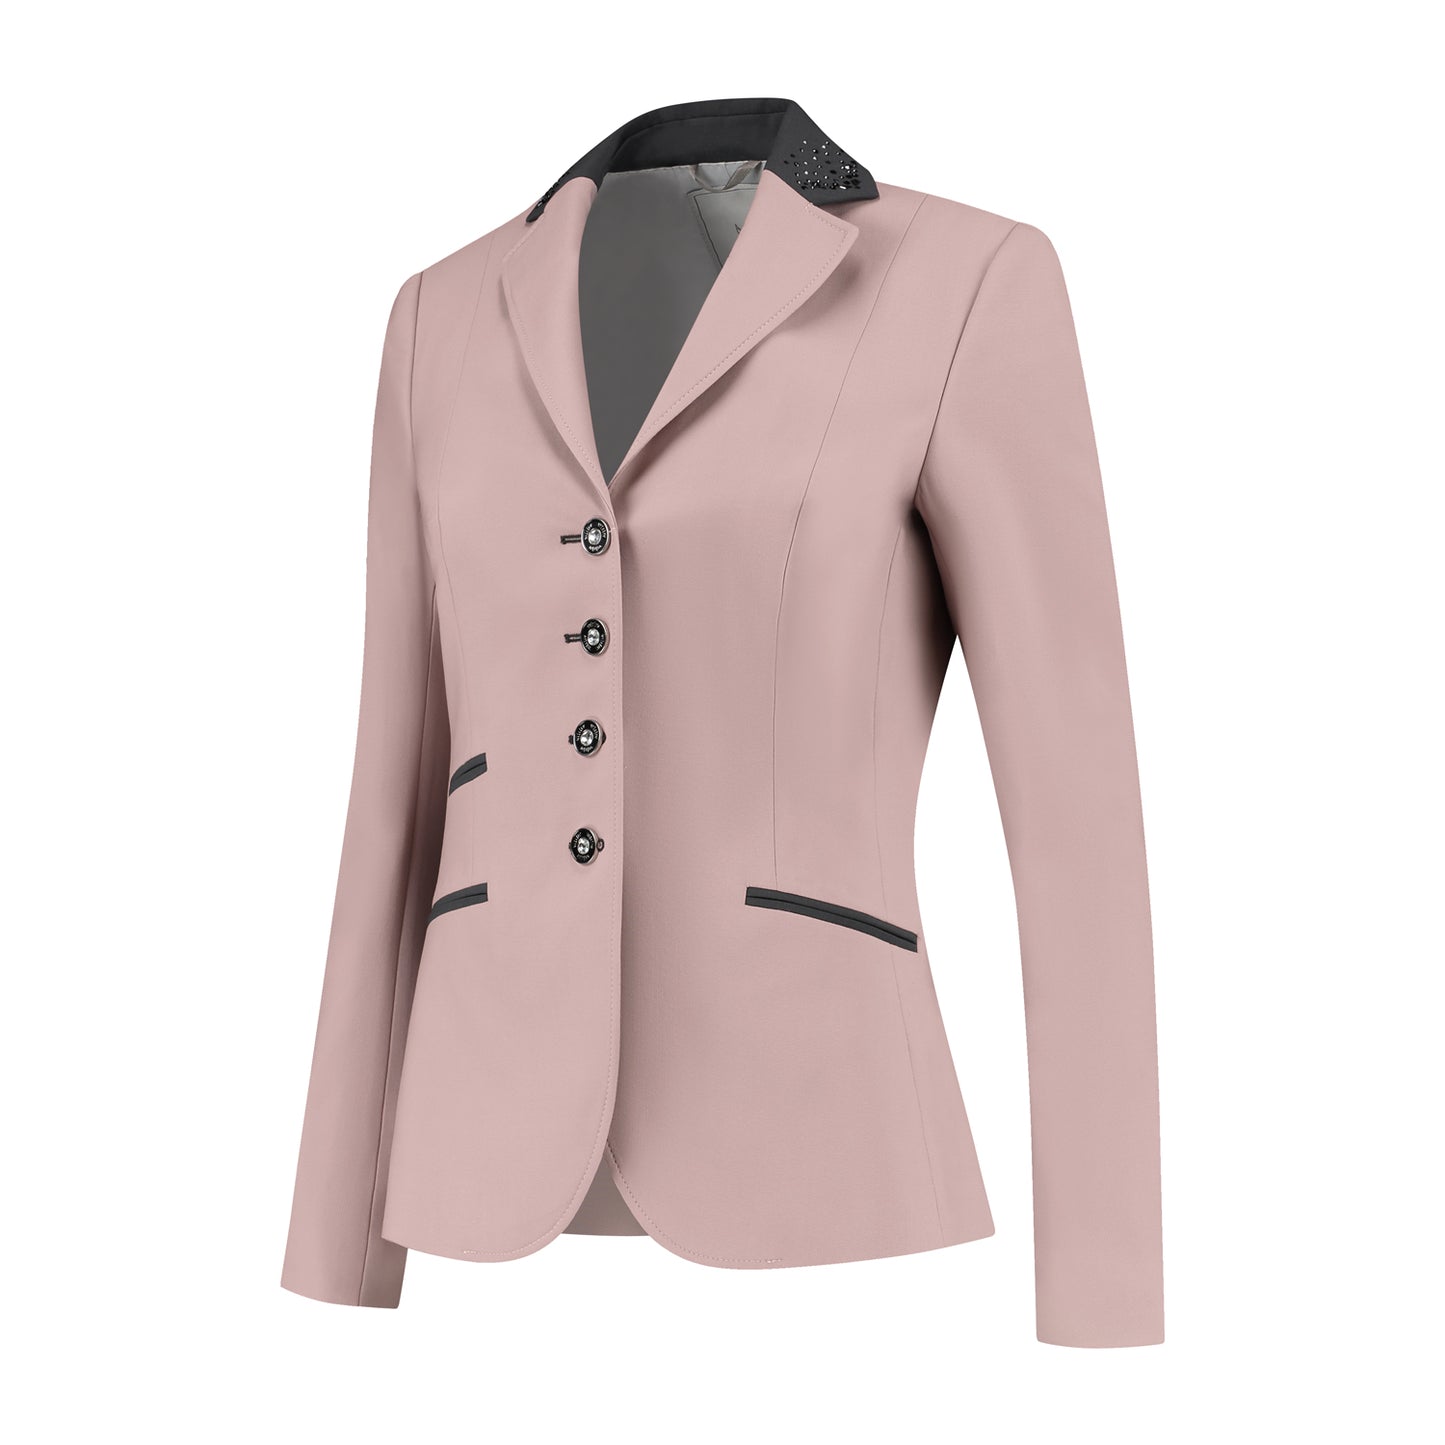 Competition jacket - Powder pink